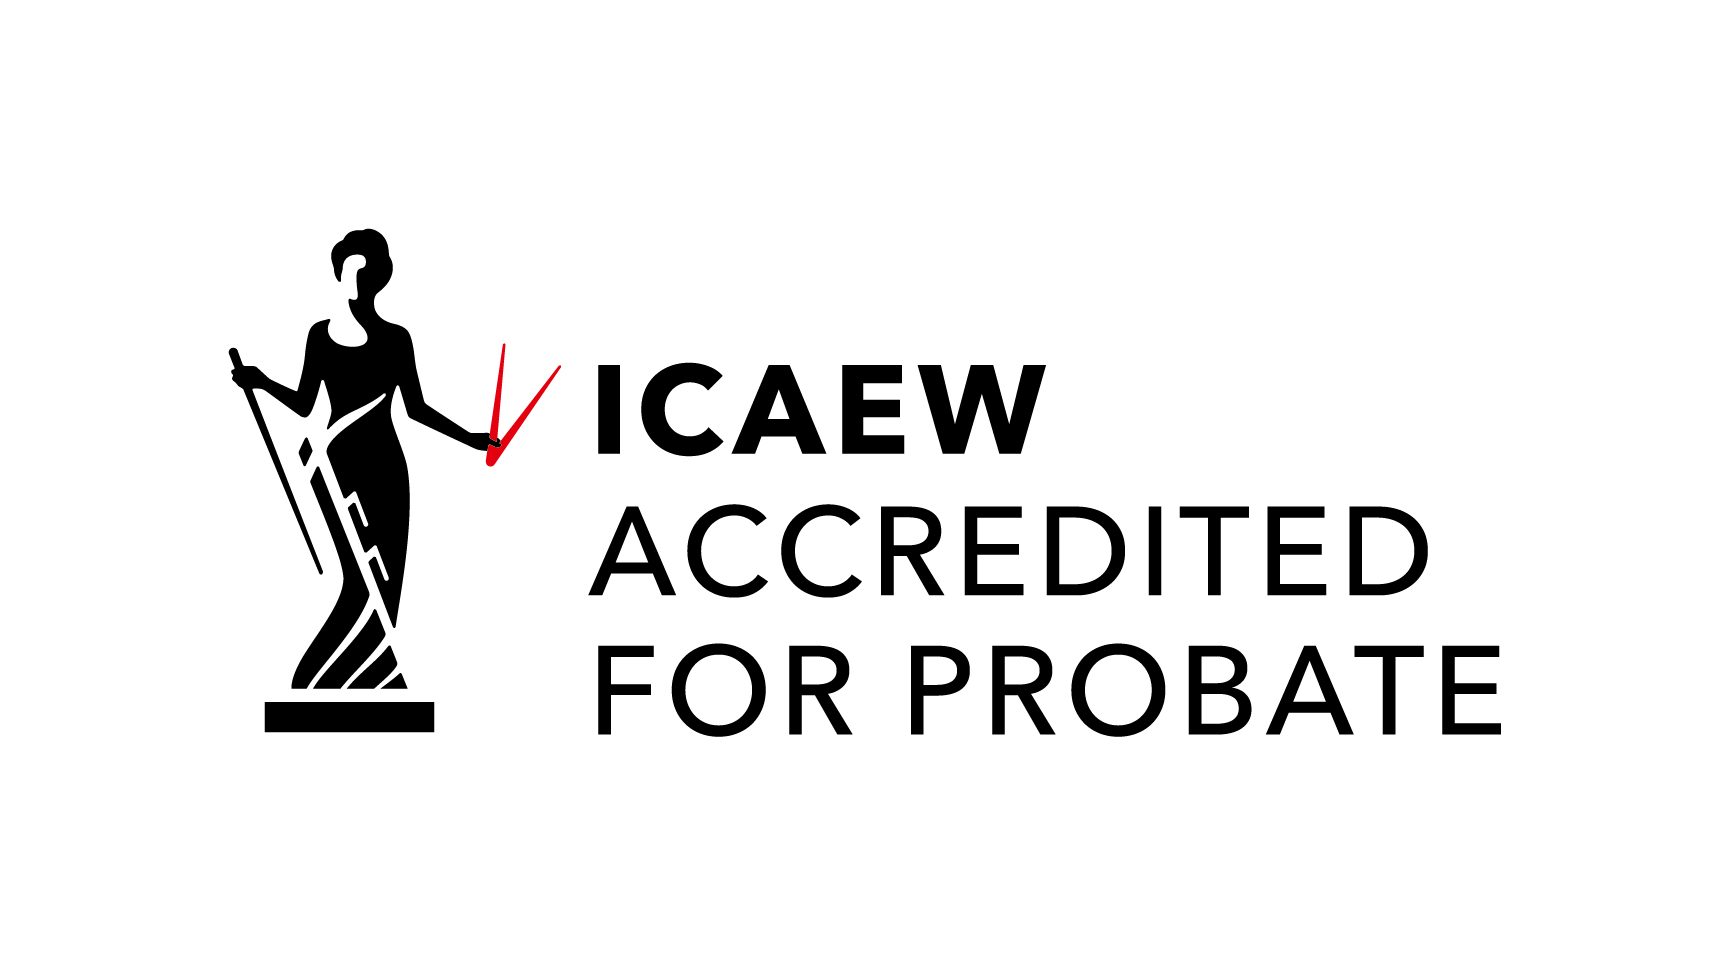 ICAEW Accredited for Probate